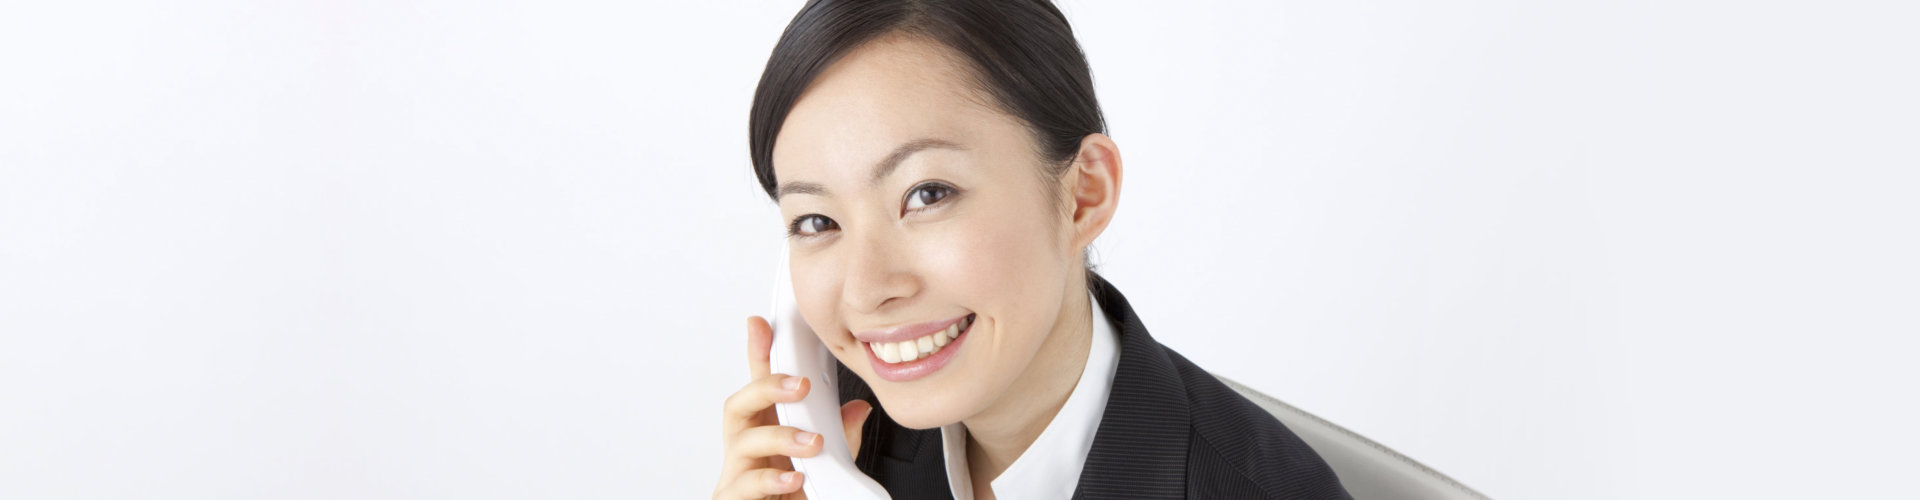 woman smiling while on the phone